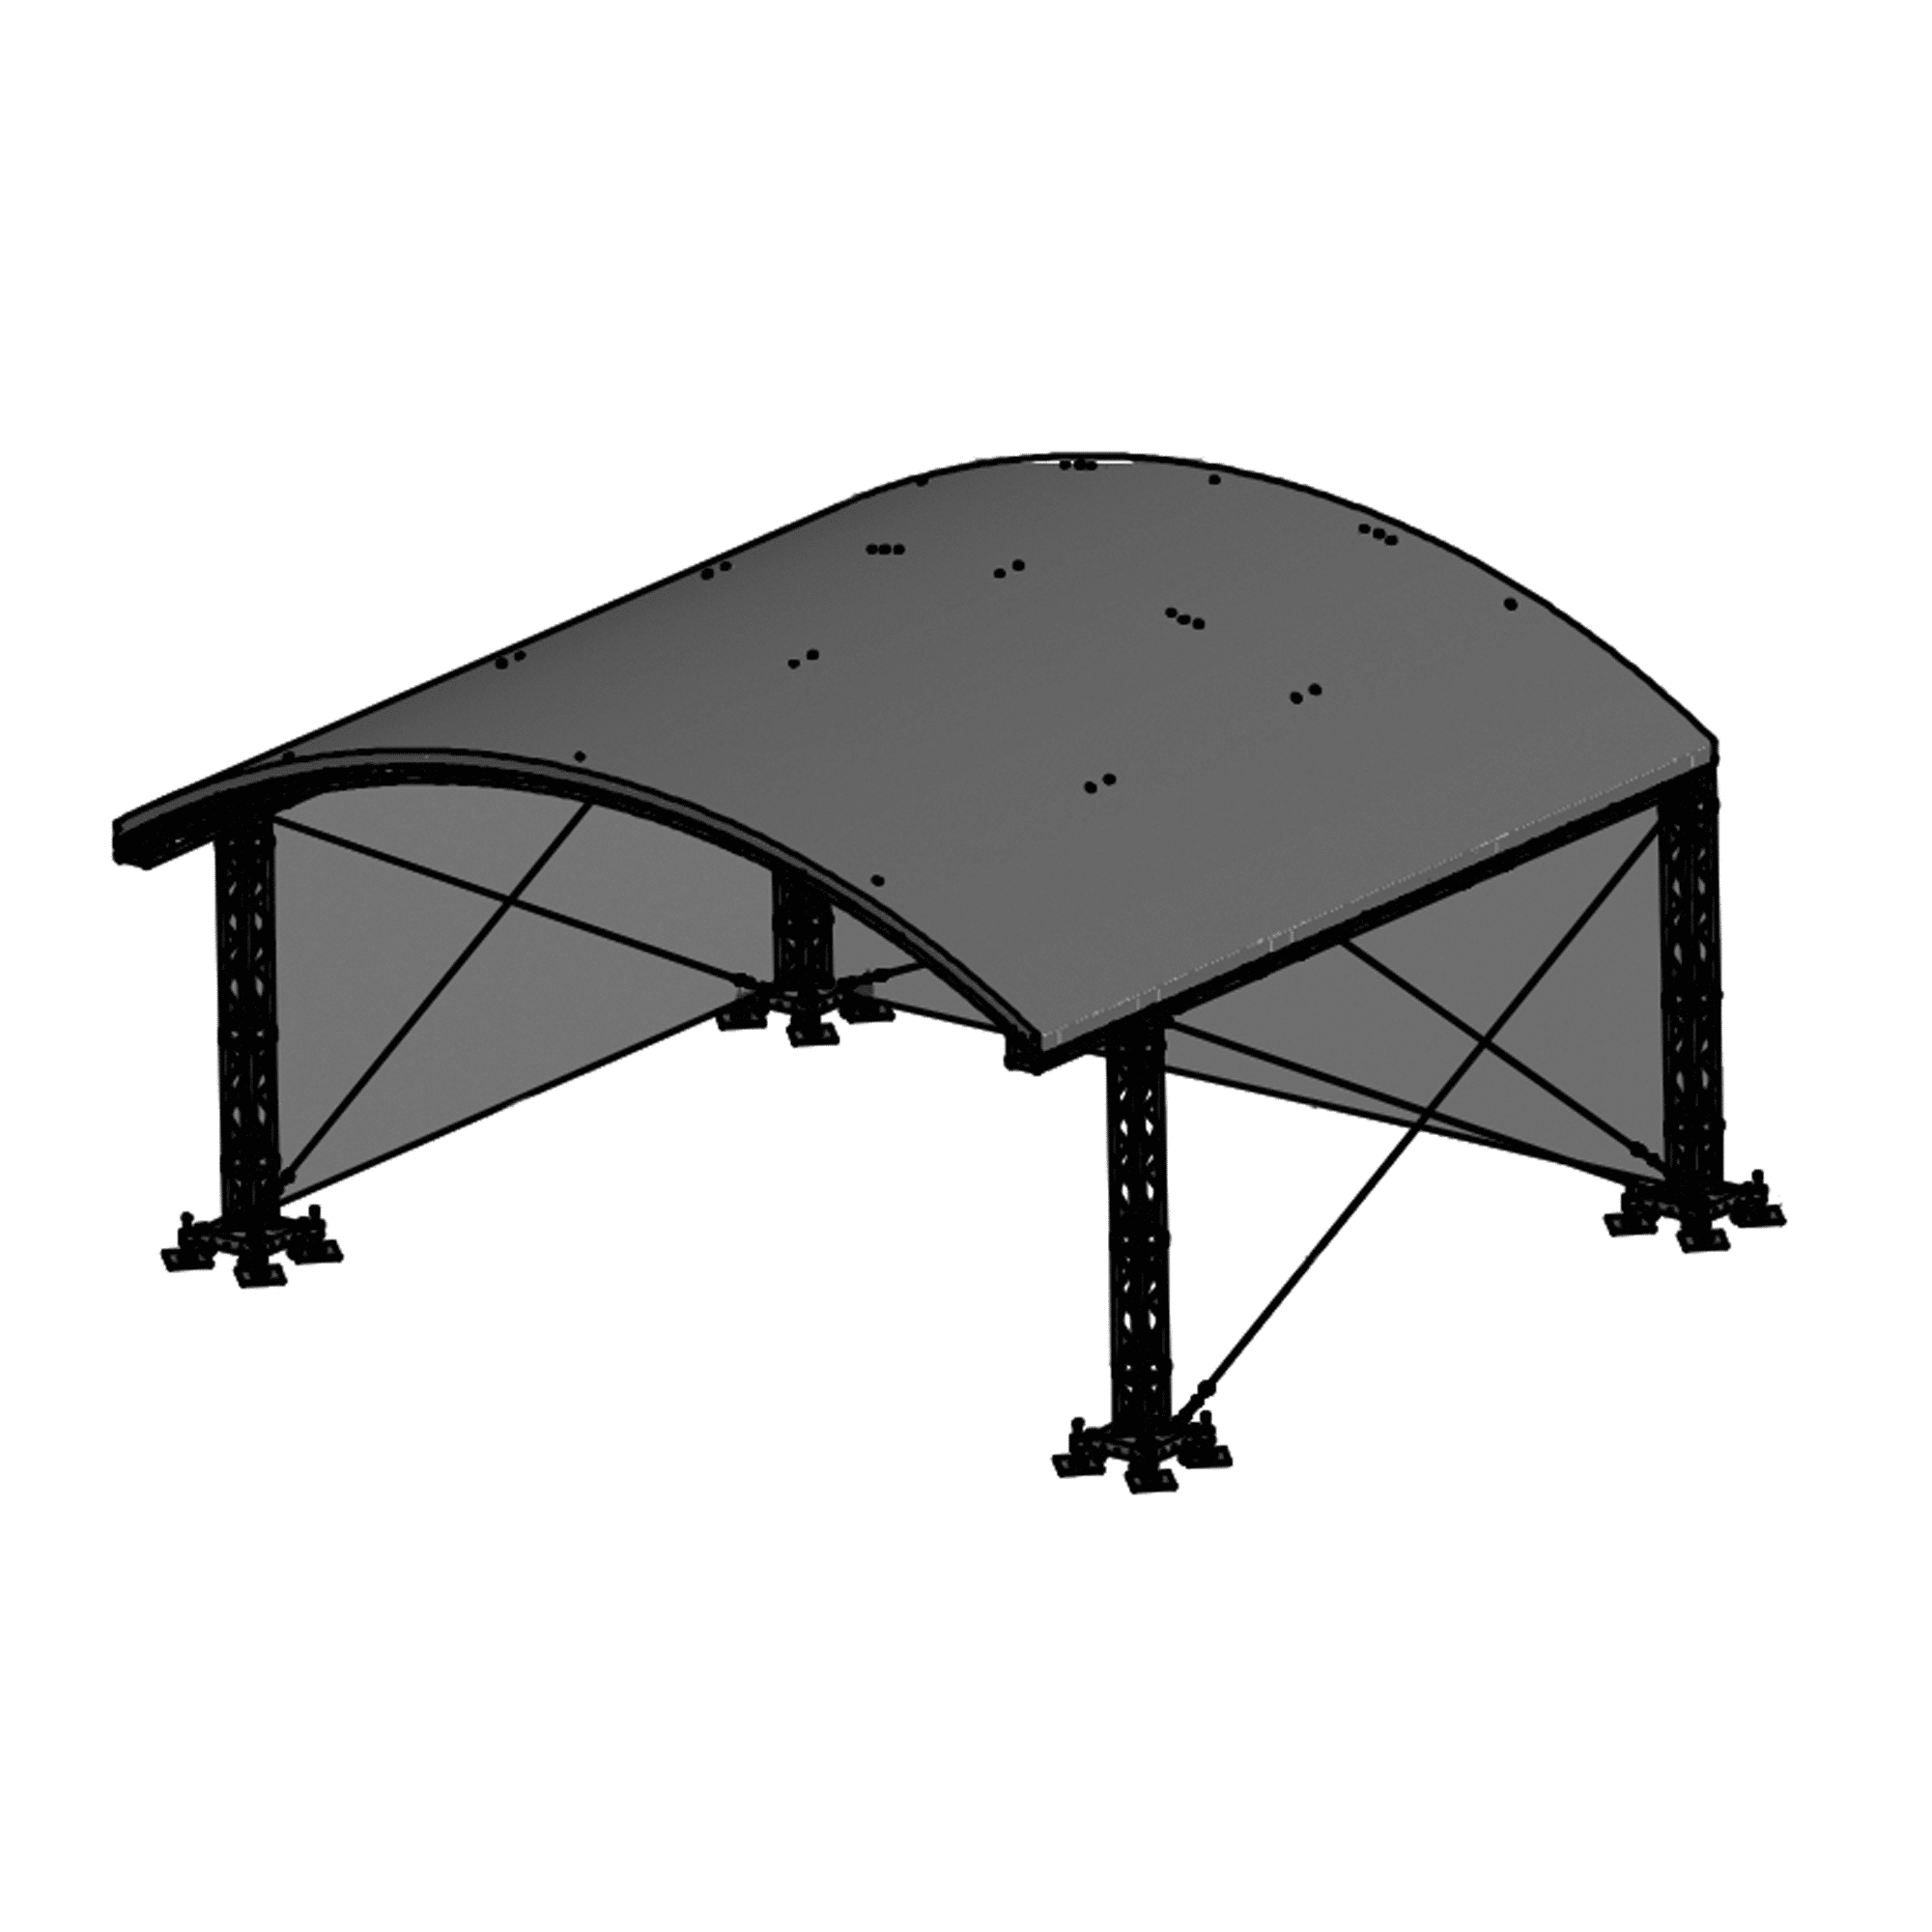 MR1 Roof System incl. B1 canopy - Onlinediscowinkel.nl